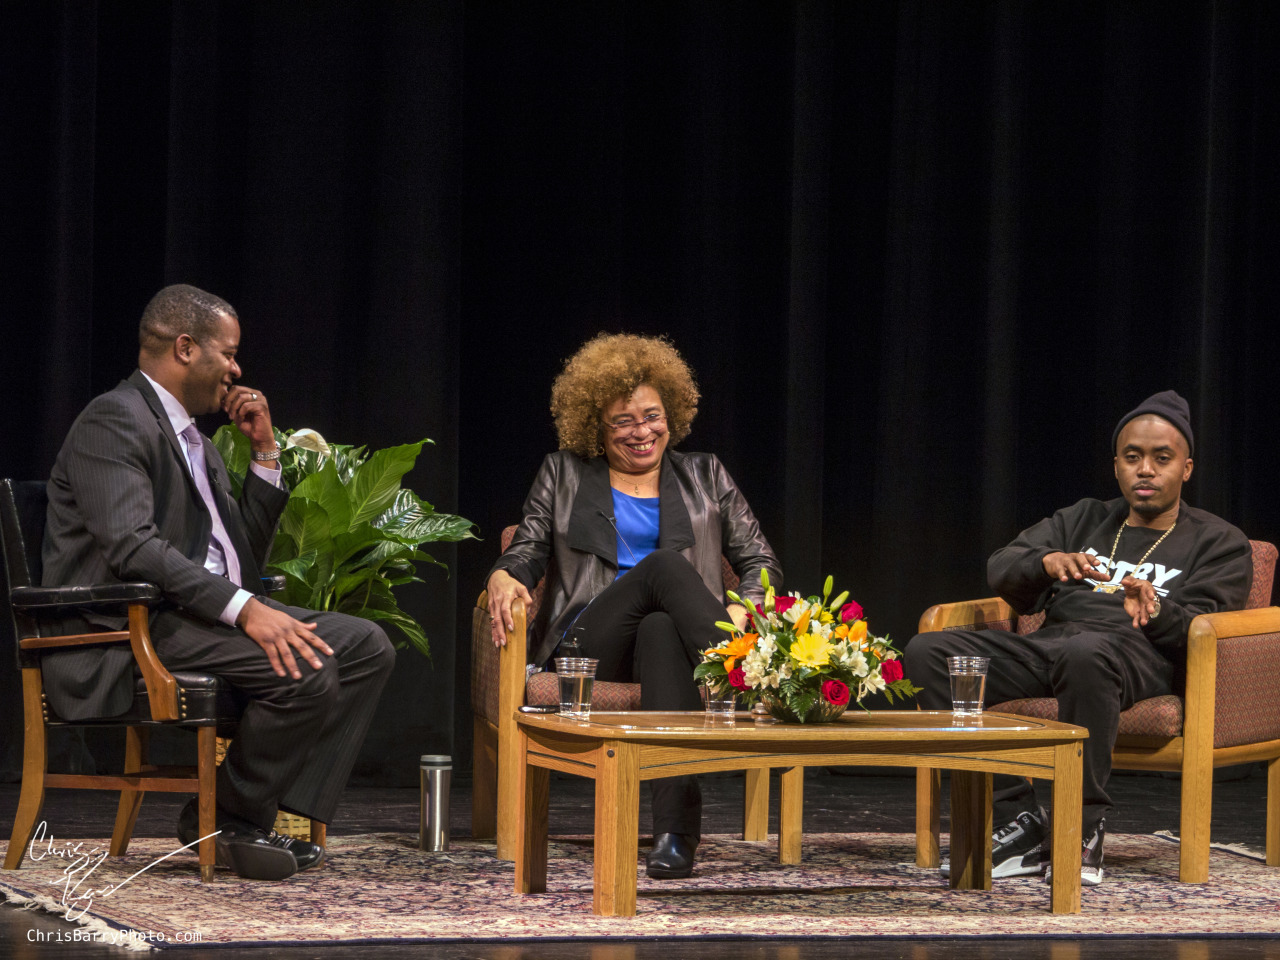 A picture of (from left to right) Dr. James Peterson, Director of Africana studies at Lehigh, political activist Angela Davis, and rapper...